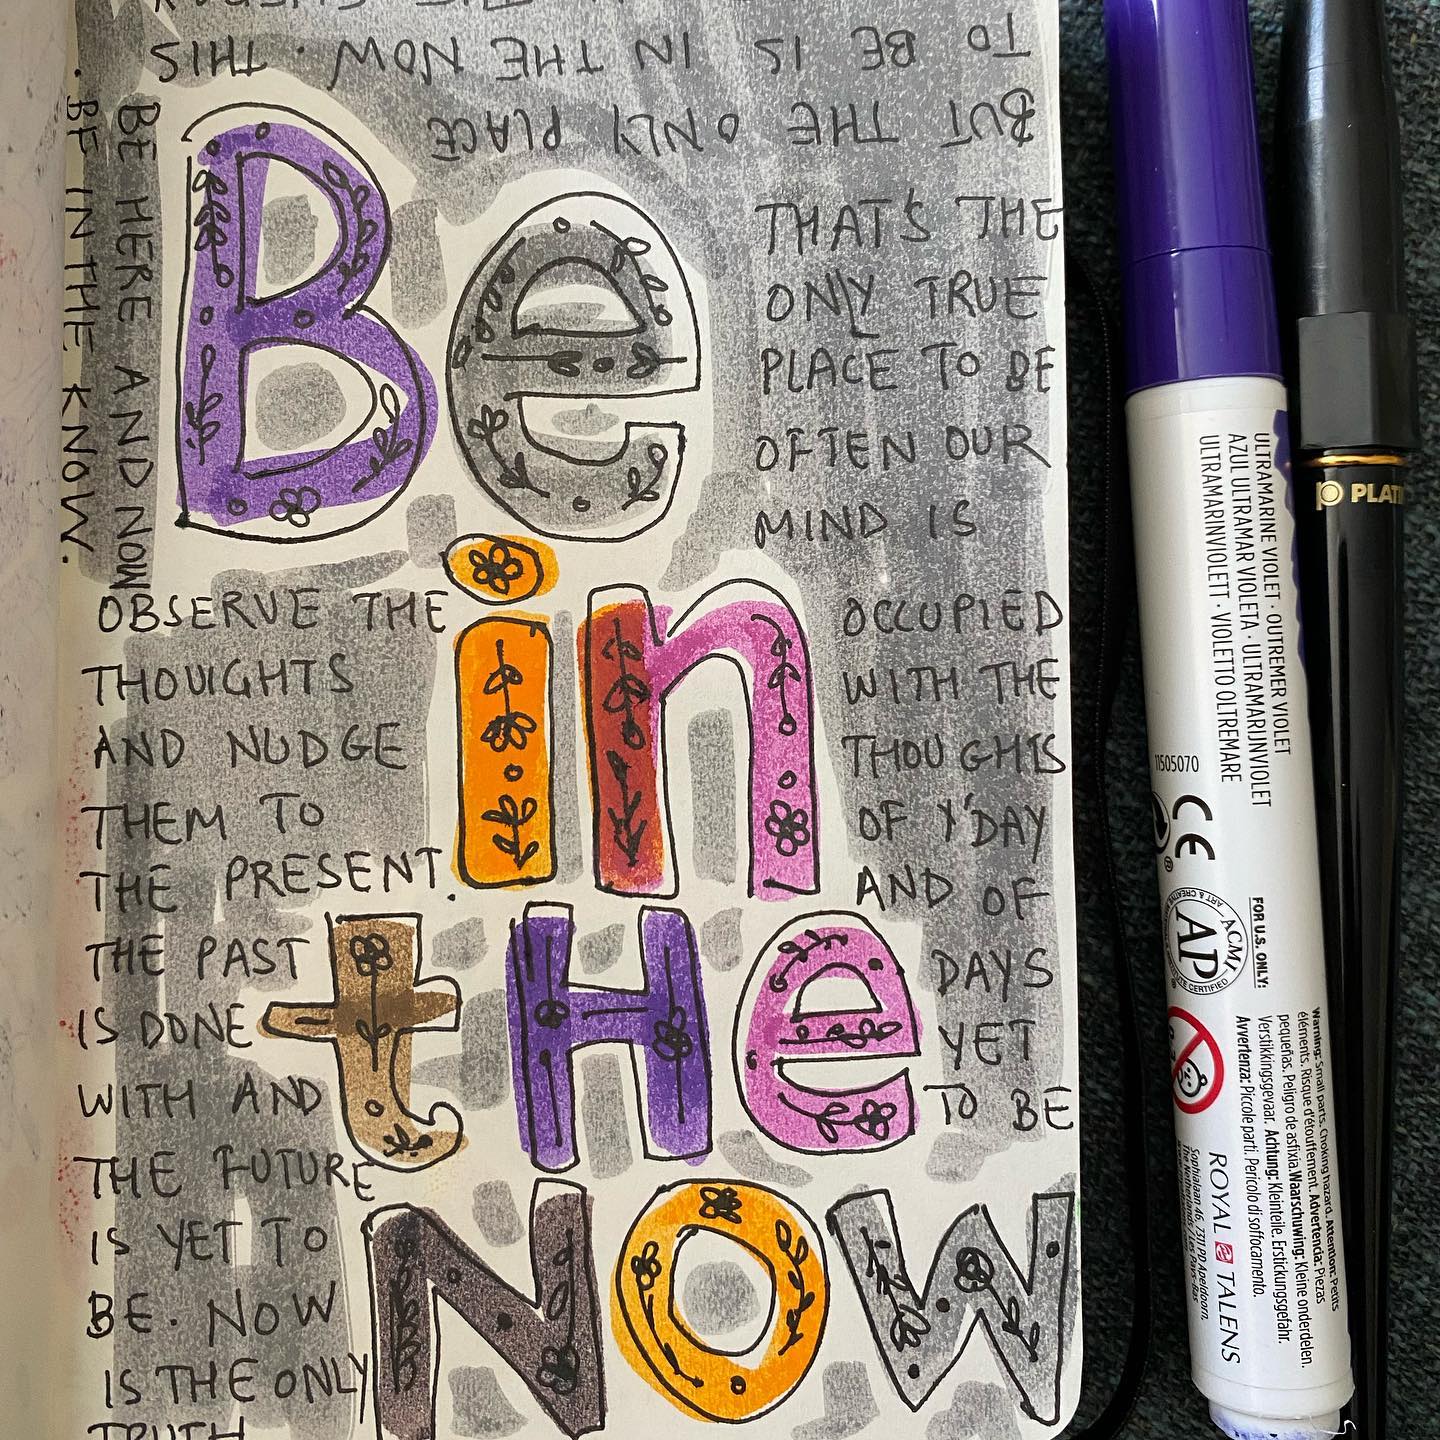 Be in the now.